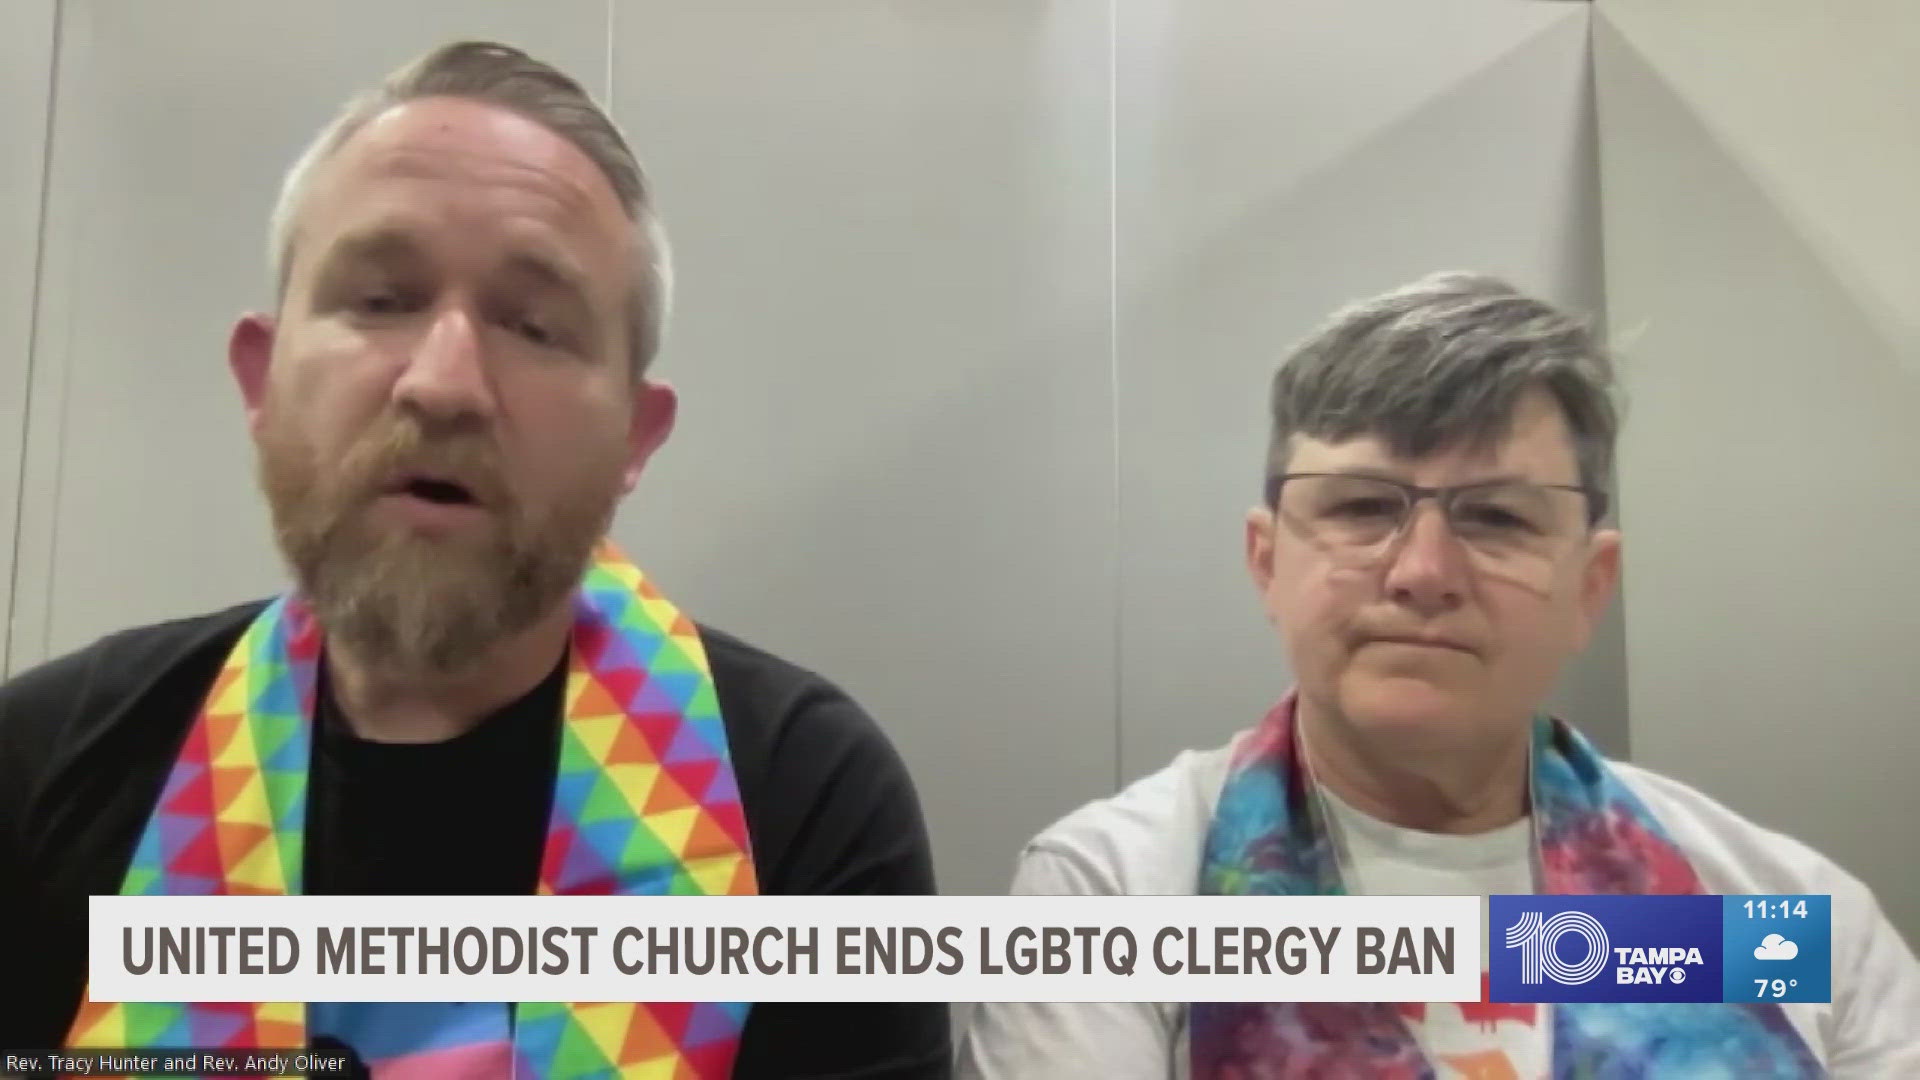 "Sexual orientation is no longer a qualification for ministry in the United Methodist Church."